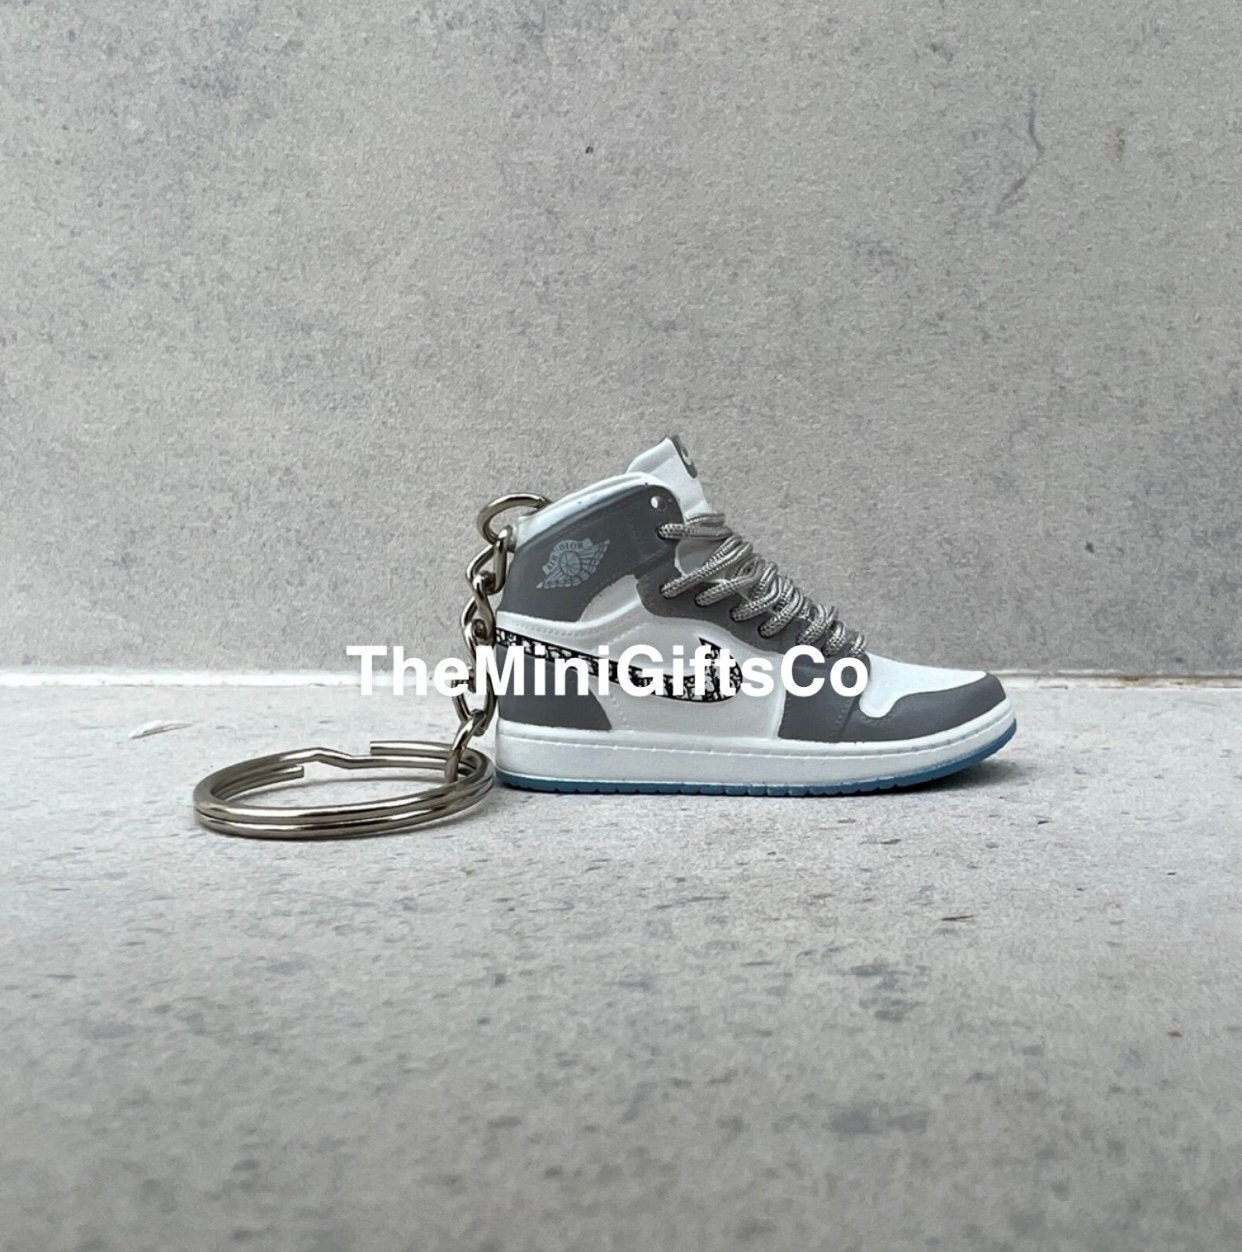 Nike air Jordan Sneakers key chain - key holder with forever sports in  grave 3d